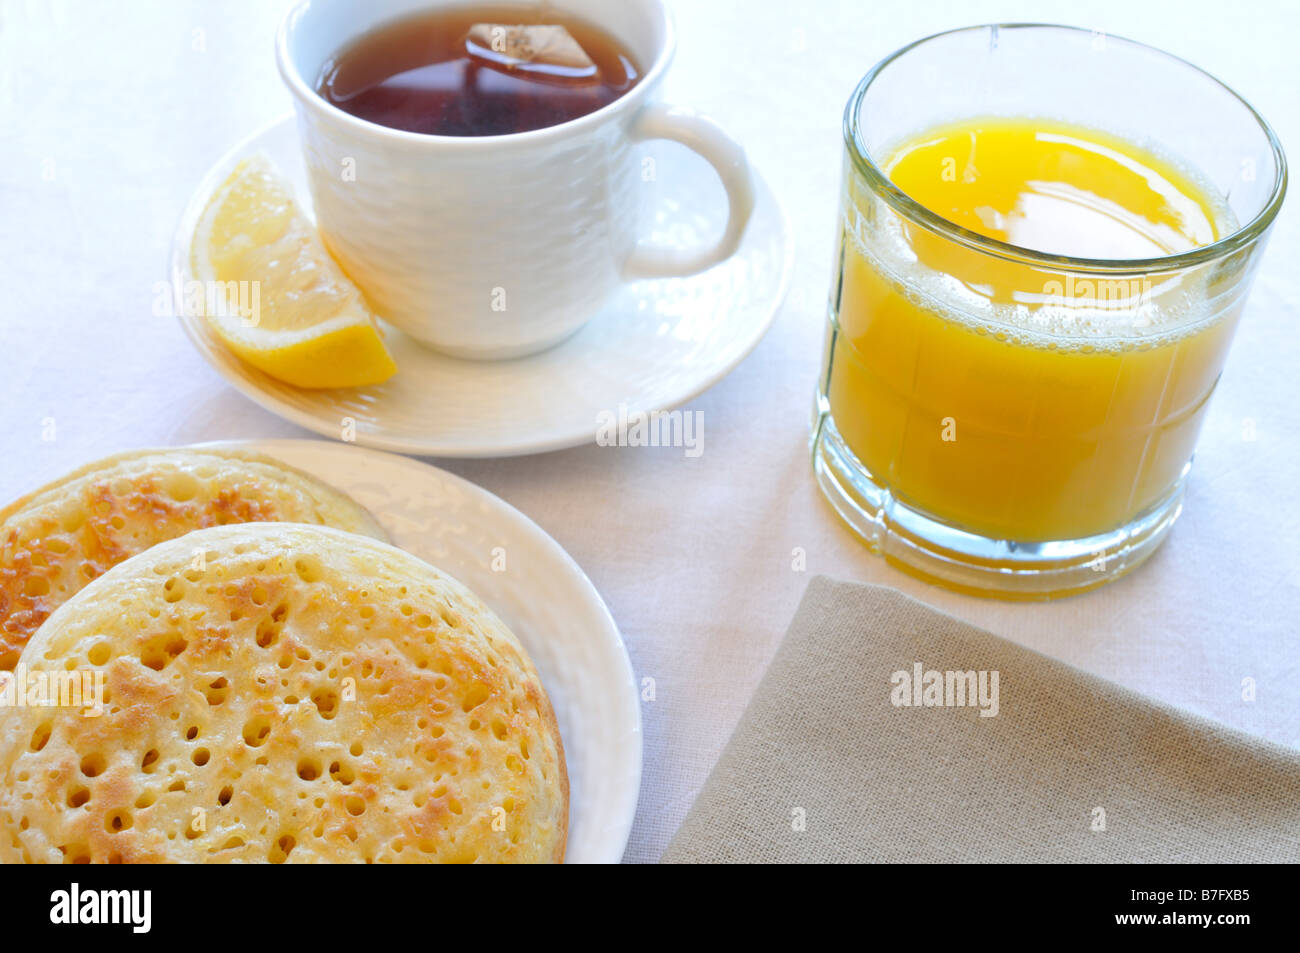 Crumpets on white plate with glass of orange juice, cup of black tea with lemon and napkin on white background. Stock Photo